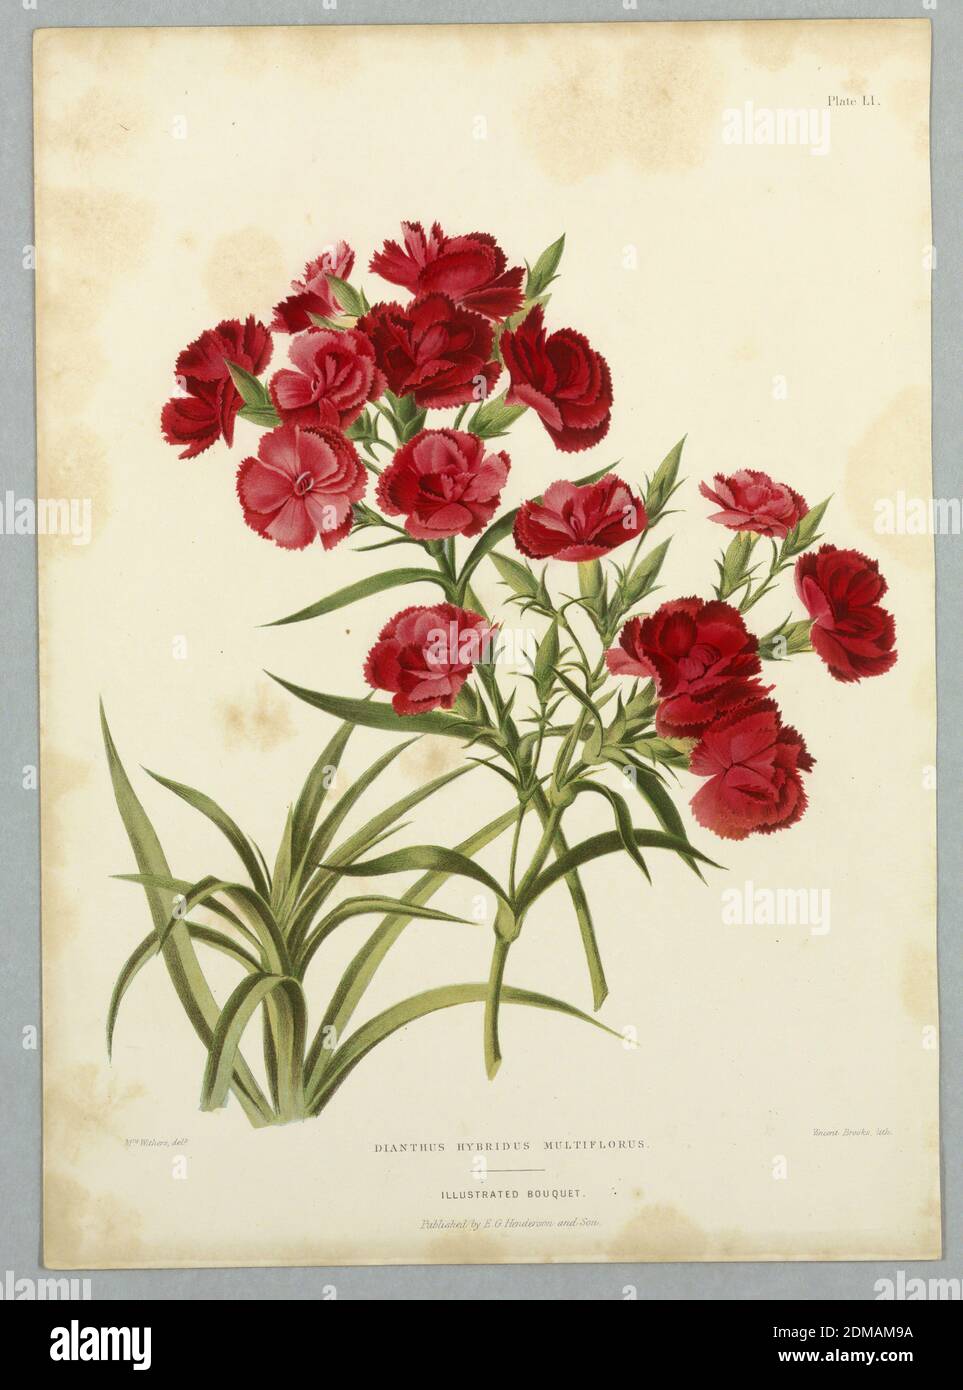 Dianthus Hybridus Multiflorus, Plate LI from Edward George Henderson's 'The Illustrated Bouquet', E. G. Henderson and Son, English, ca. 1859 - 1886, Mrs. Withers, English, active 19th c., Chromolithograph on paper, Dianthus Hybridus Multiflorus, Plate LI from Edward George Henderson's 'The Illustrated Bouquet.', London, England, ca. 1857–1864, Print Stock Photo